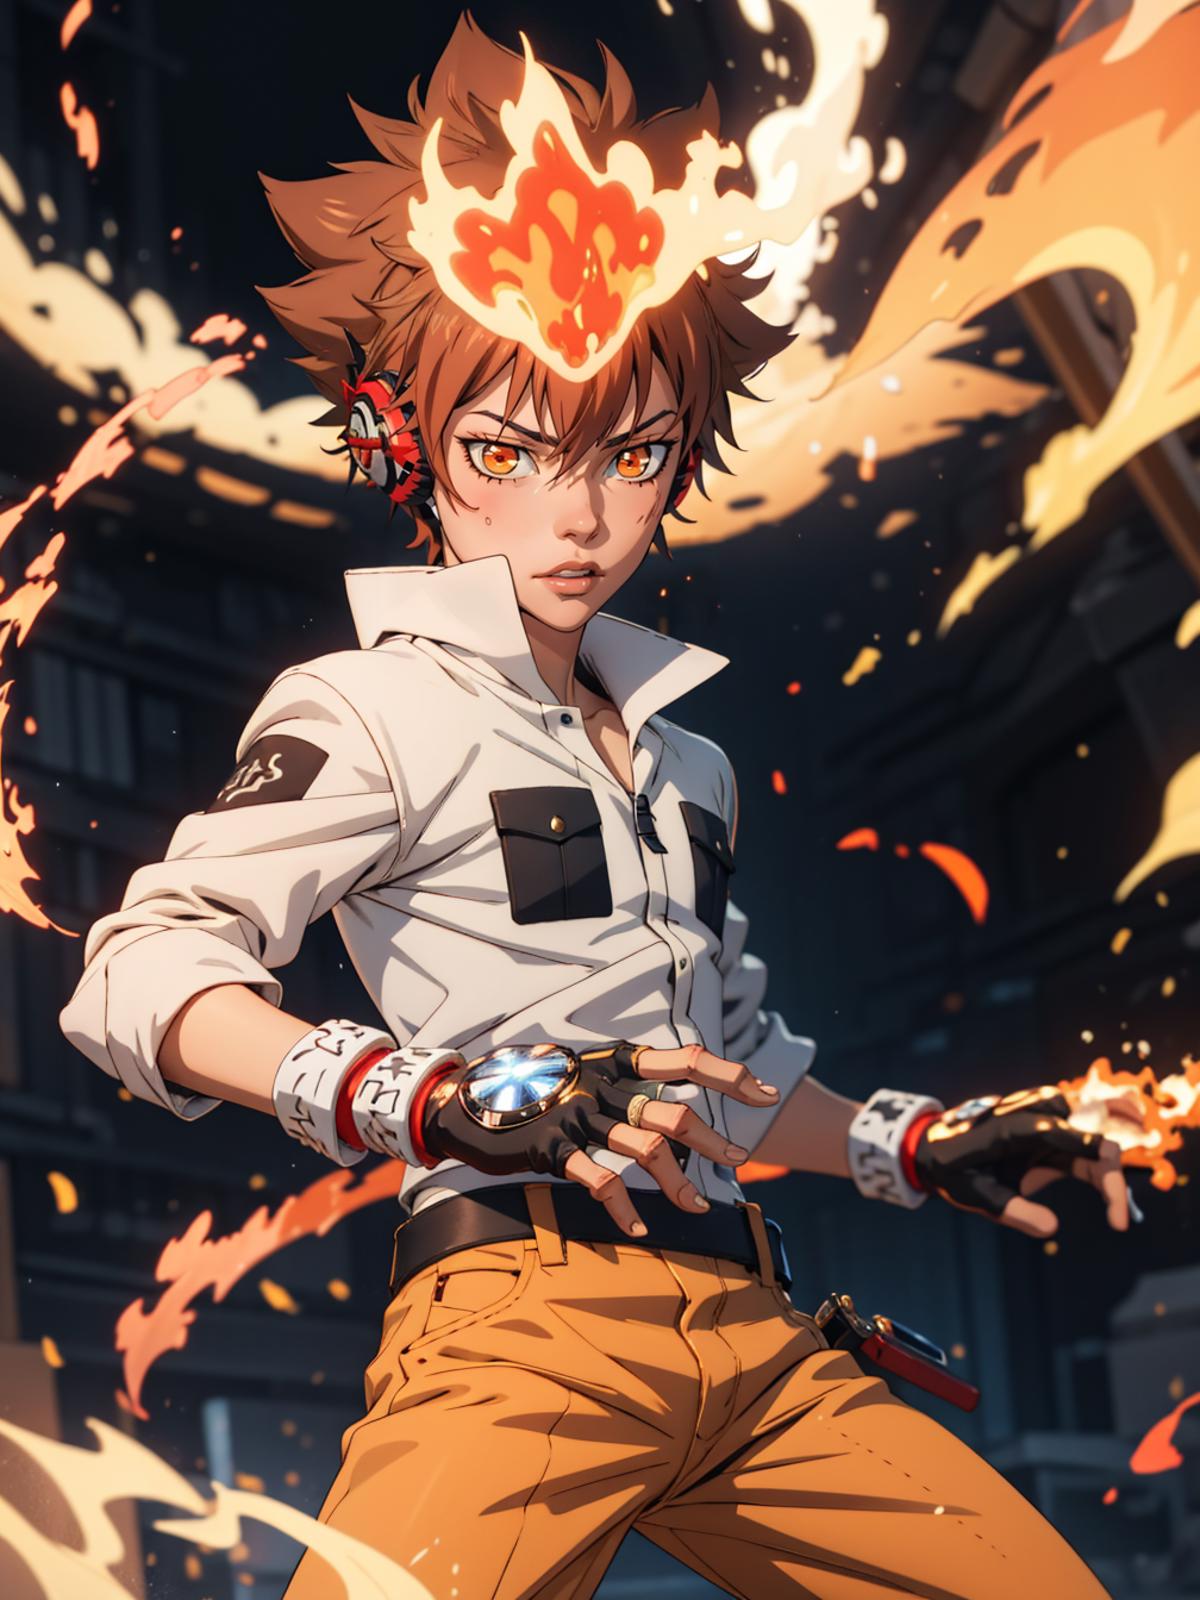 Anime-style character wearing red and white gloves and a white shirt with black stripes, holding a flaming sword.